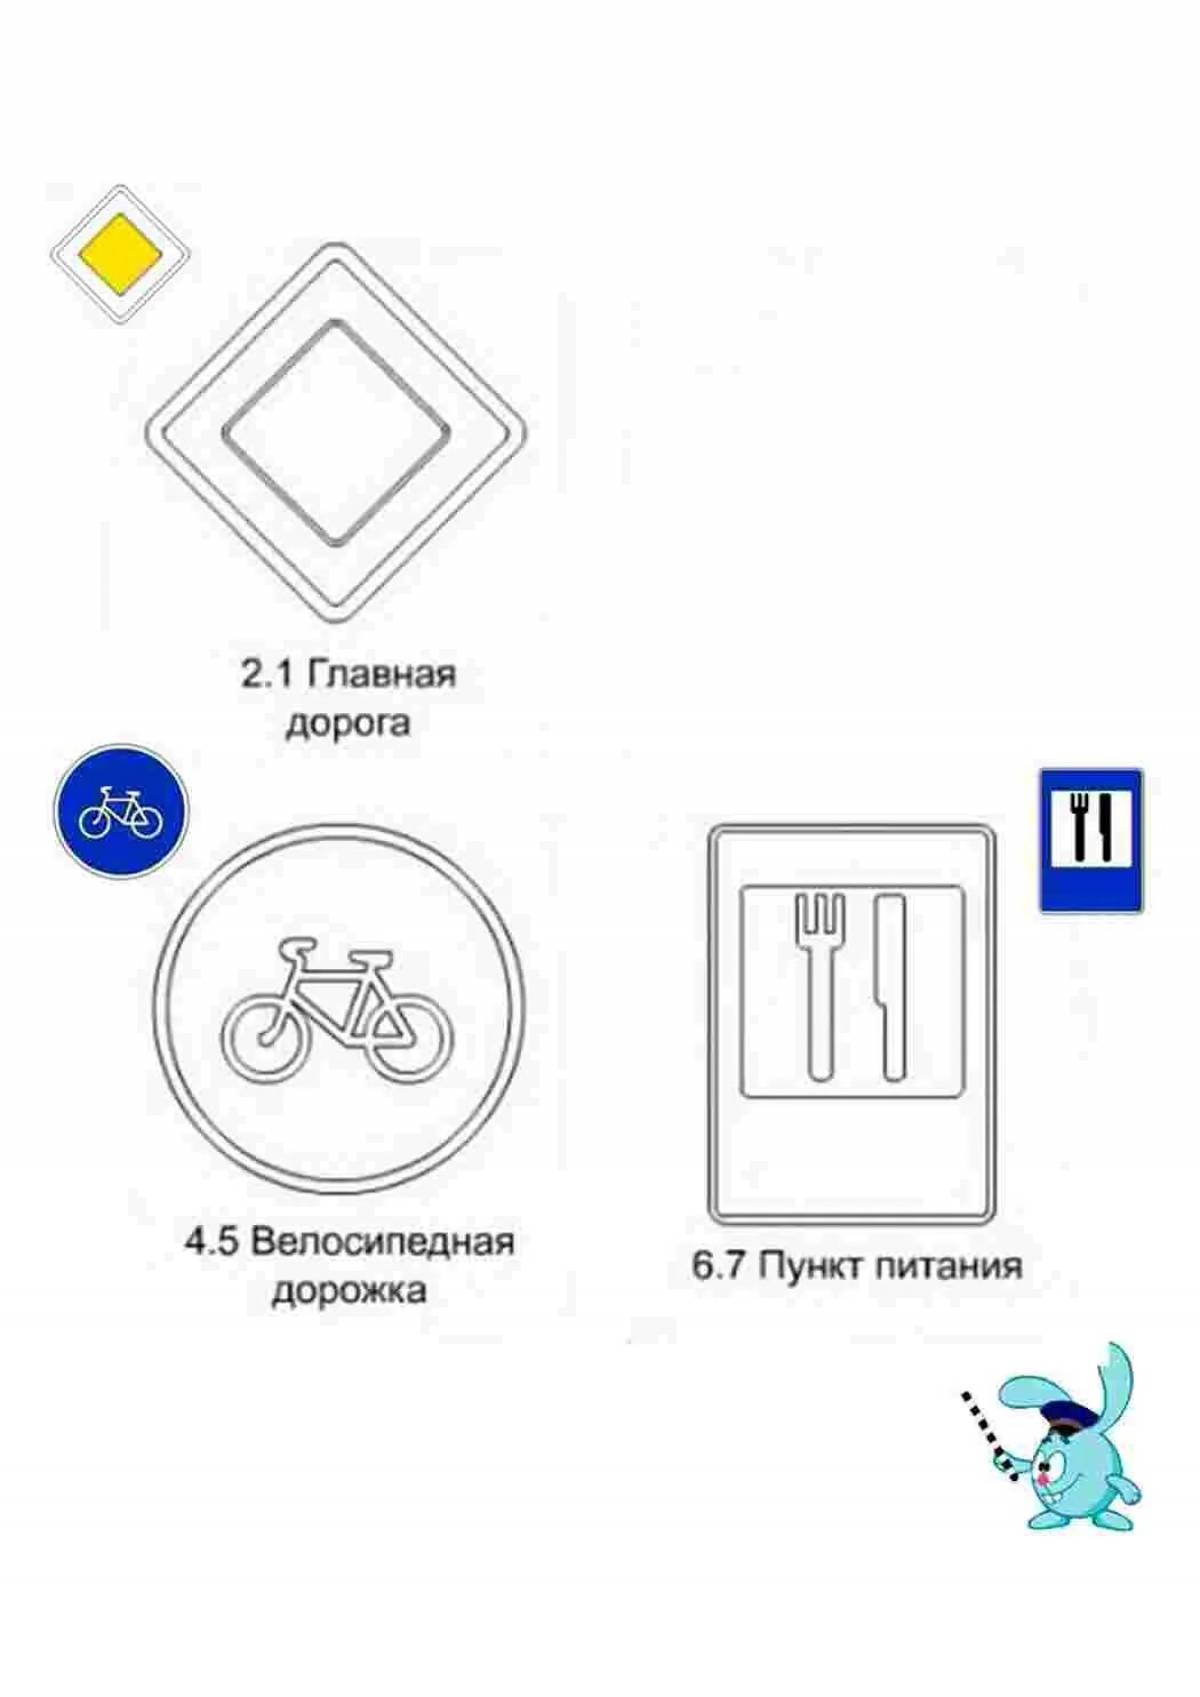 Traffic signs for preschool children according to traffic rules #2